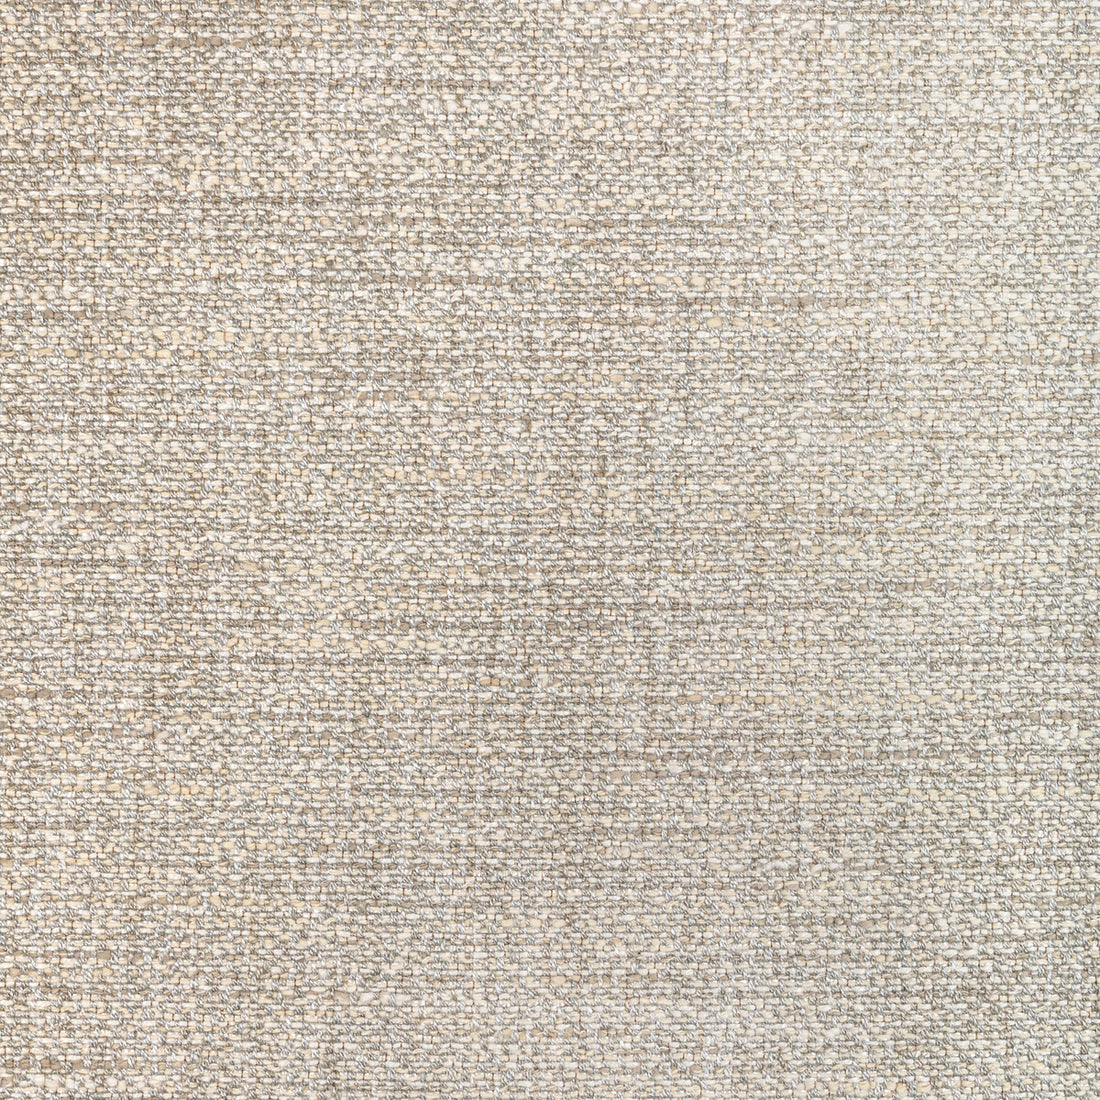 Variance fabric in stone color - pattern 36333.106.0 - by Kravet Couture in the Modern Luxe III collection